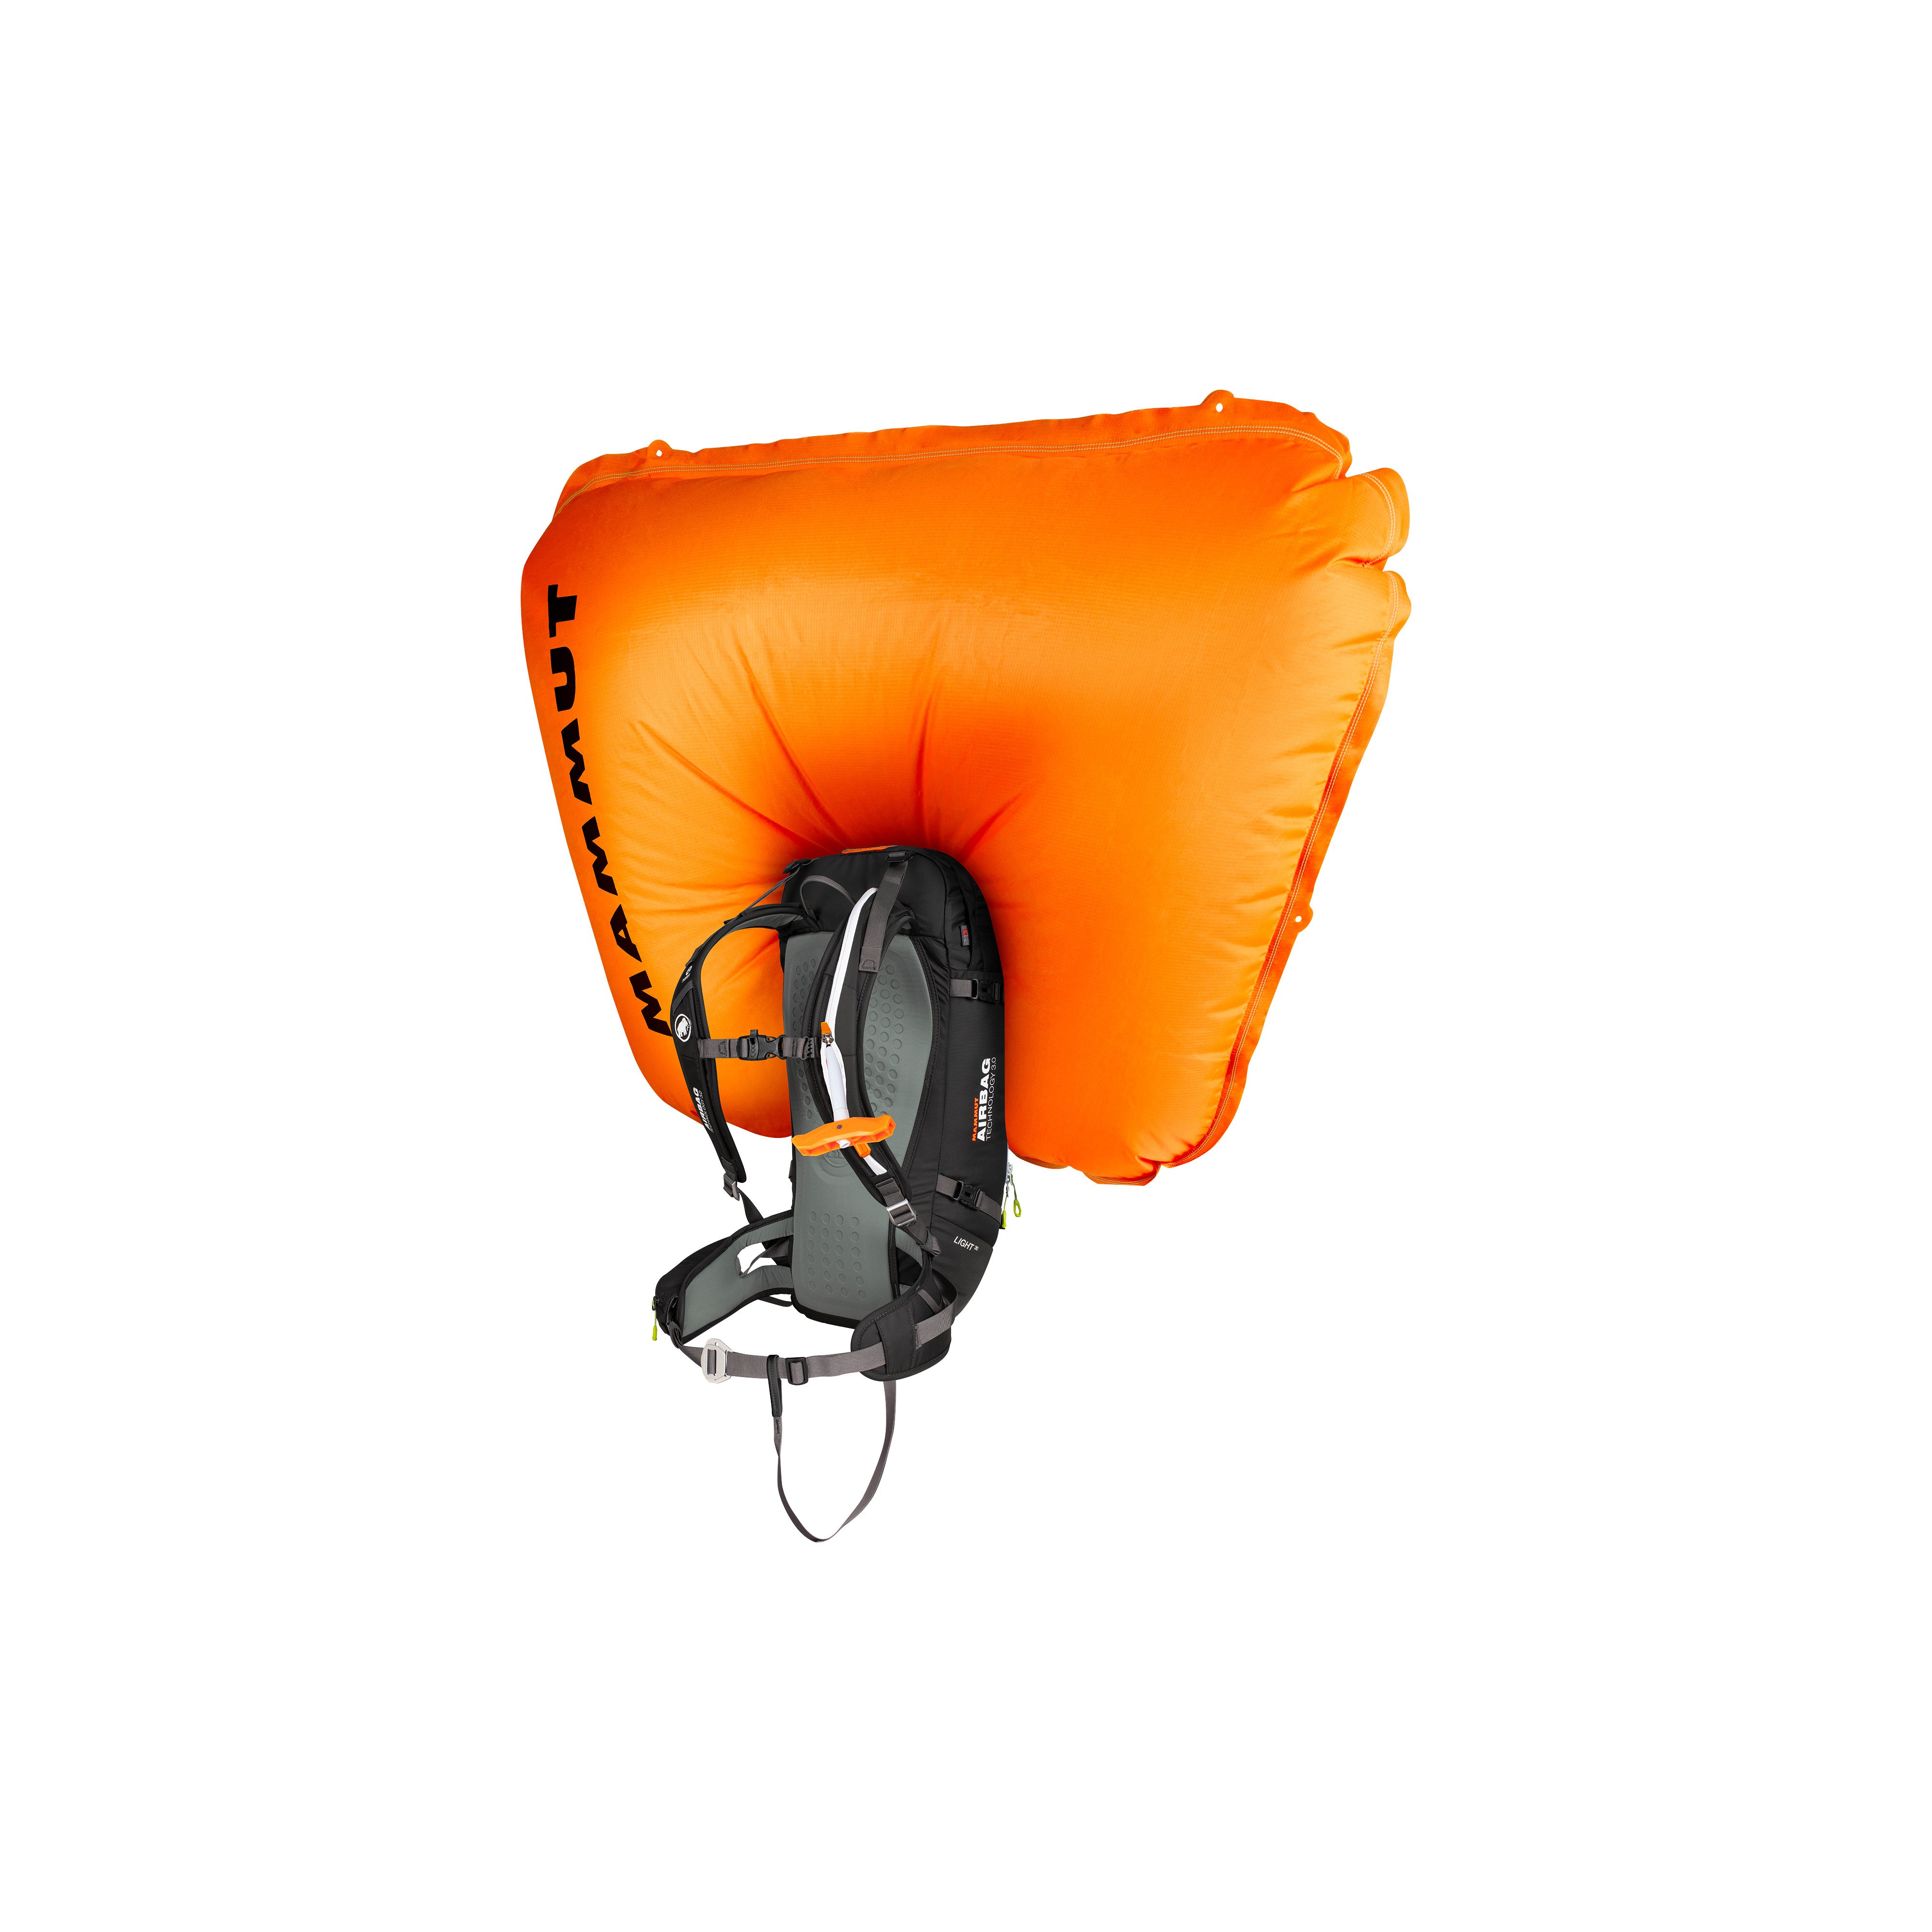 Light Removable Airbag 3.0 - graphite, 30 L product image